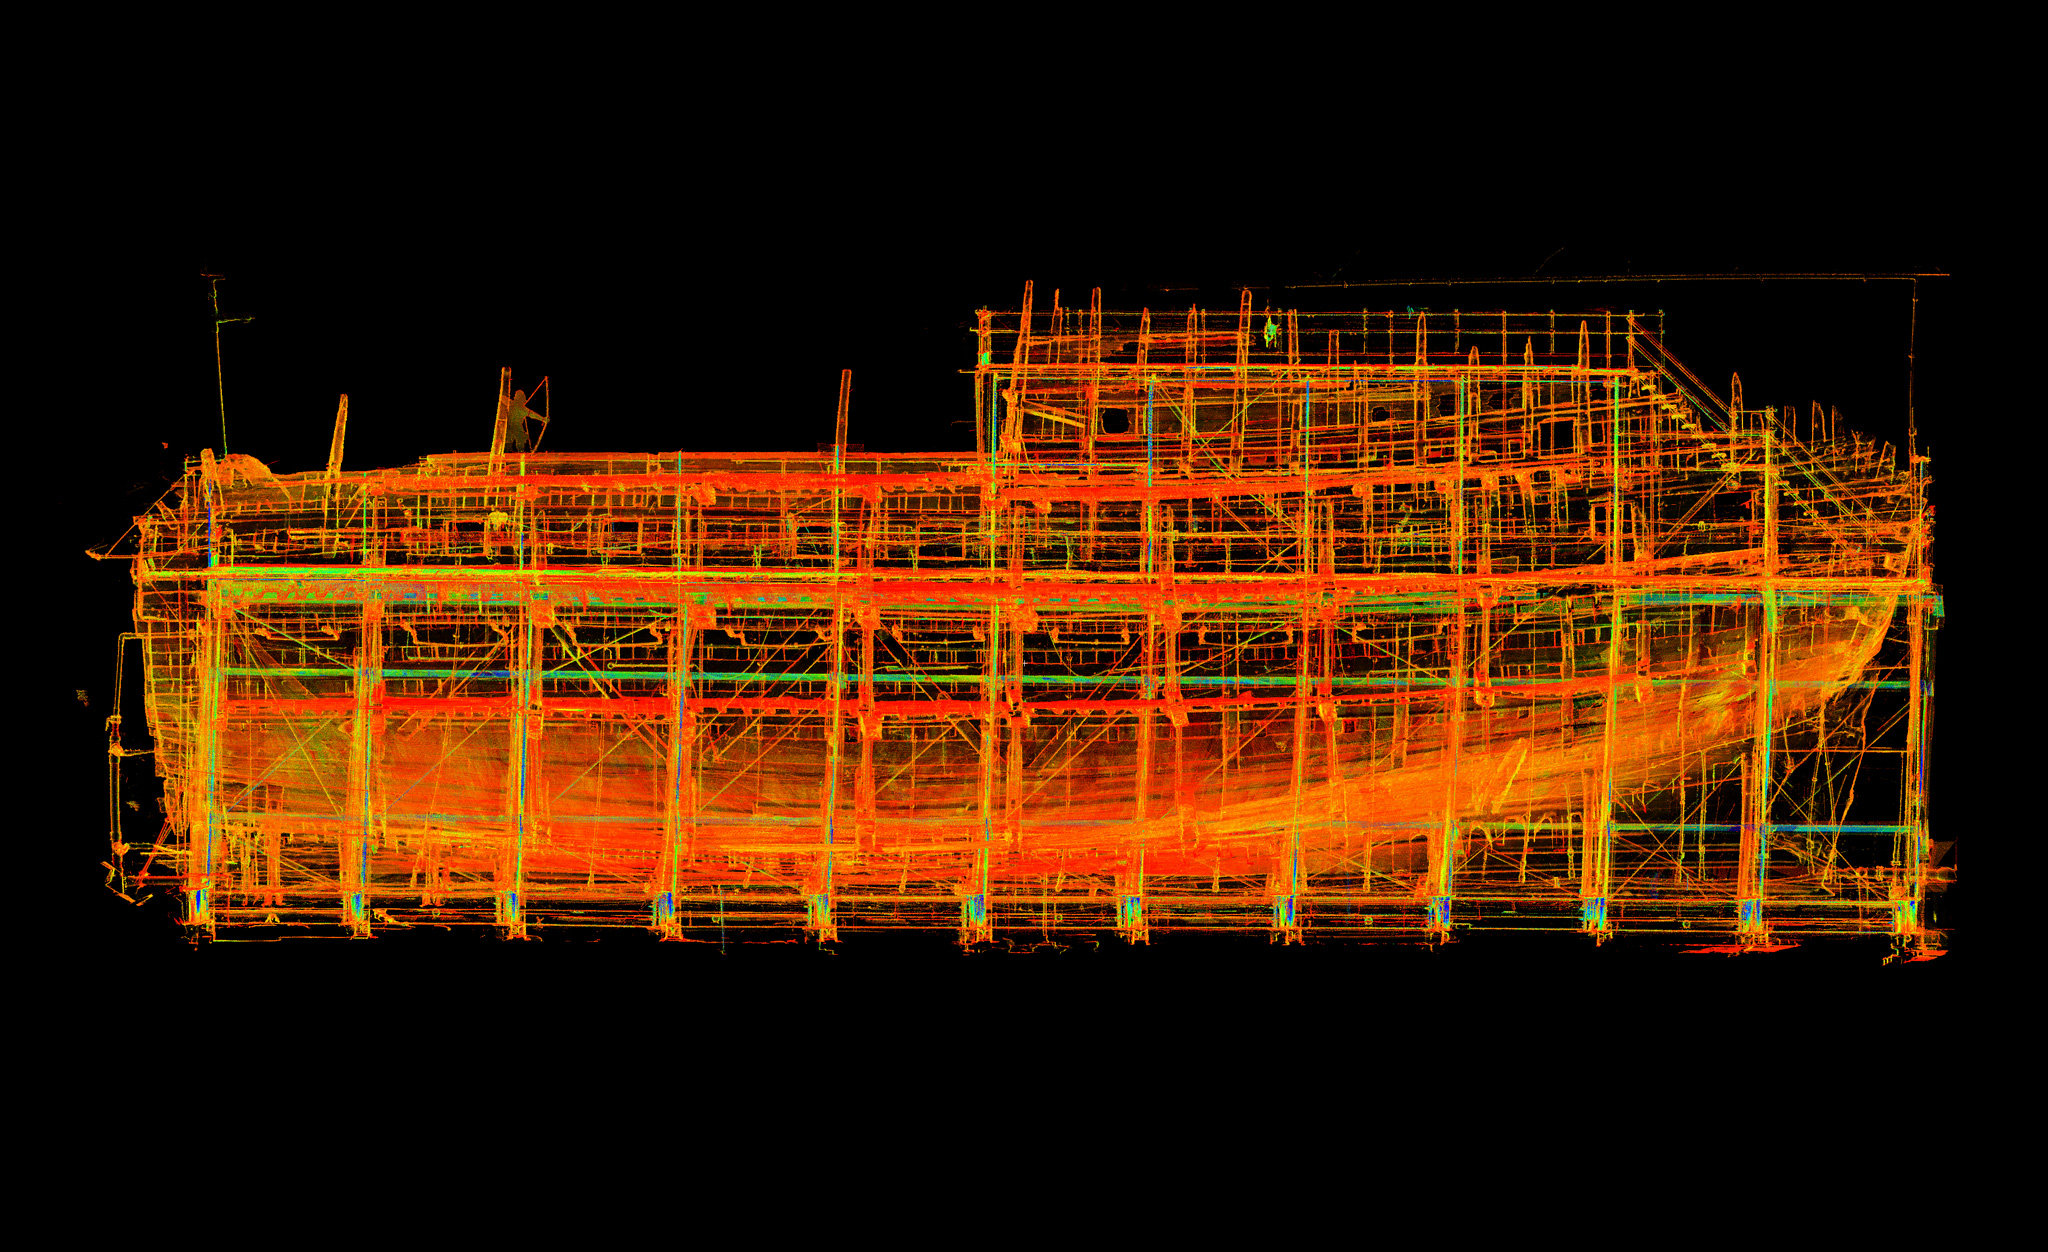 Point Cloud view of the Mary Rose